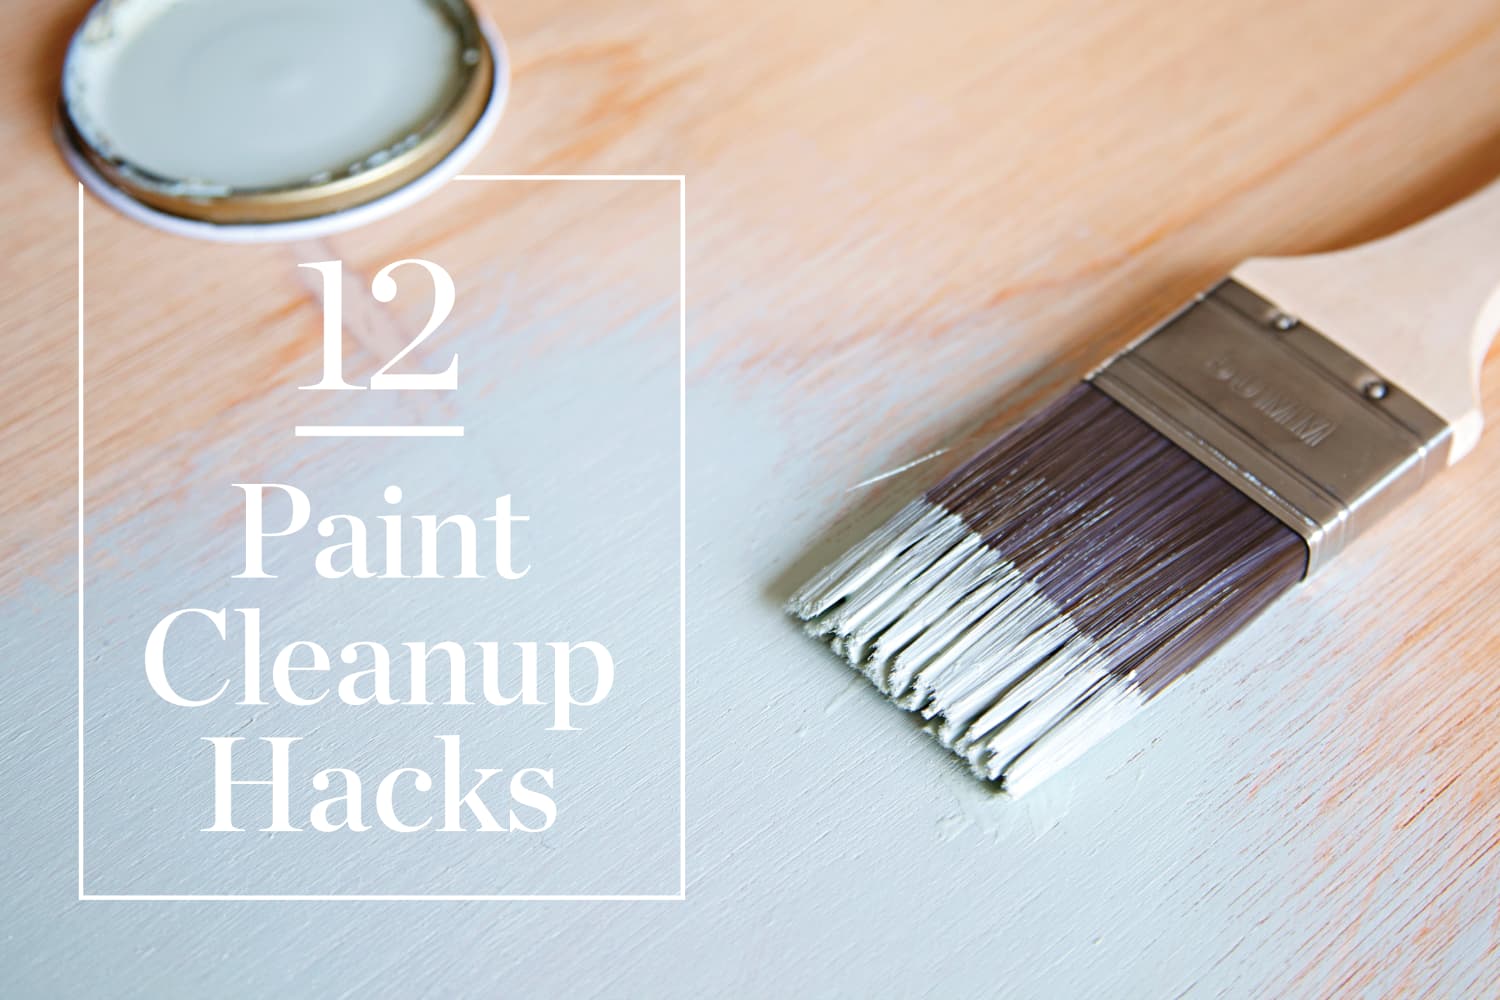 Not a Drop: A Dozen Tips and Hacks that Make Painting Cleanup Easy